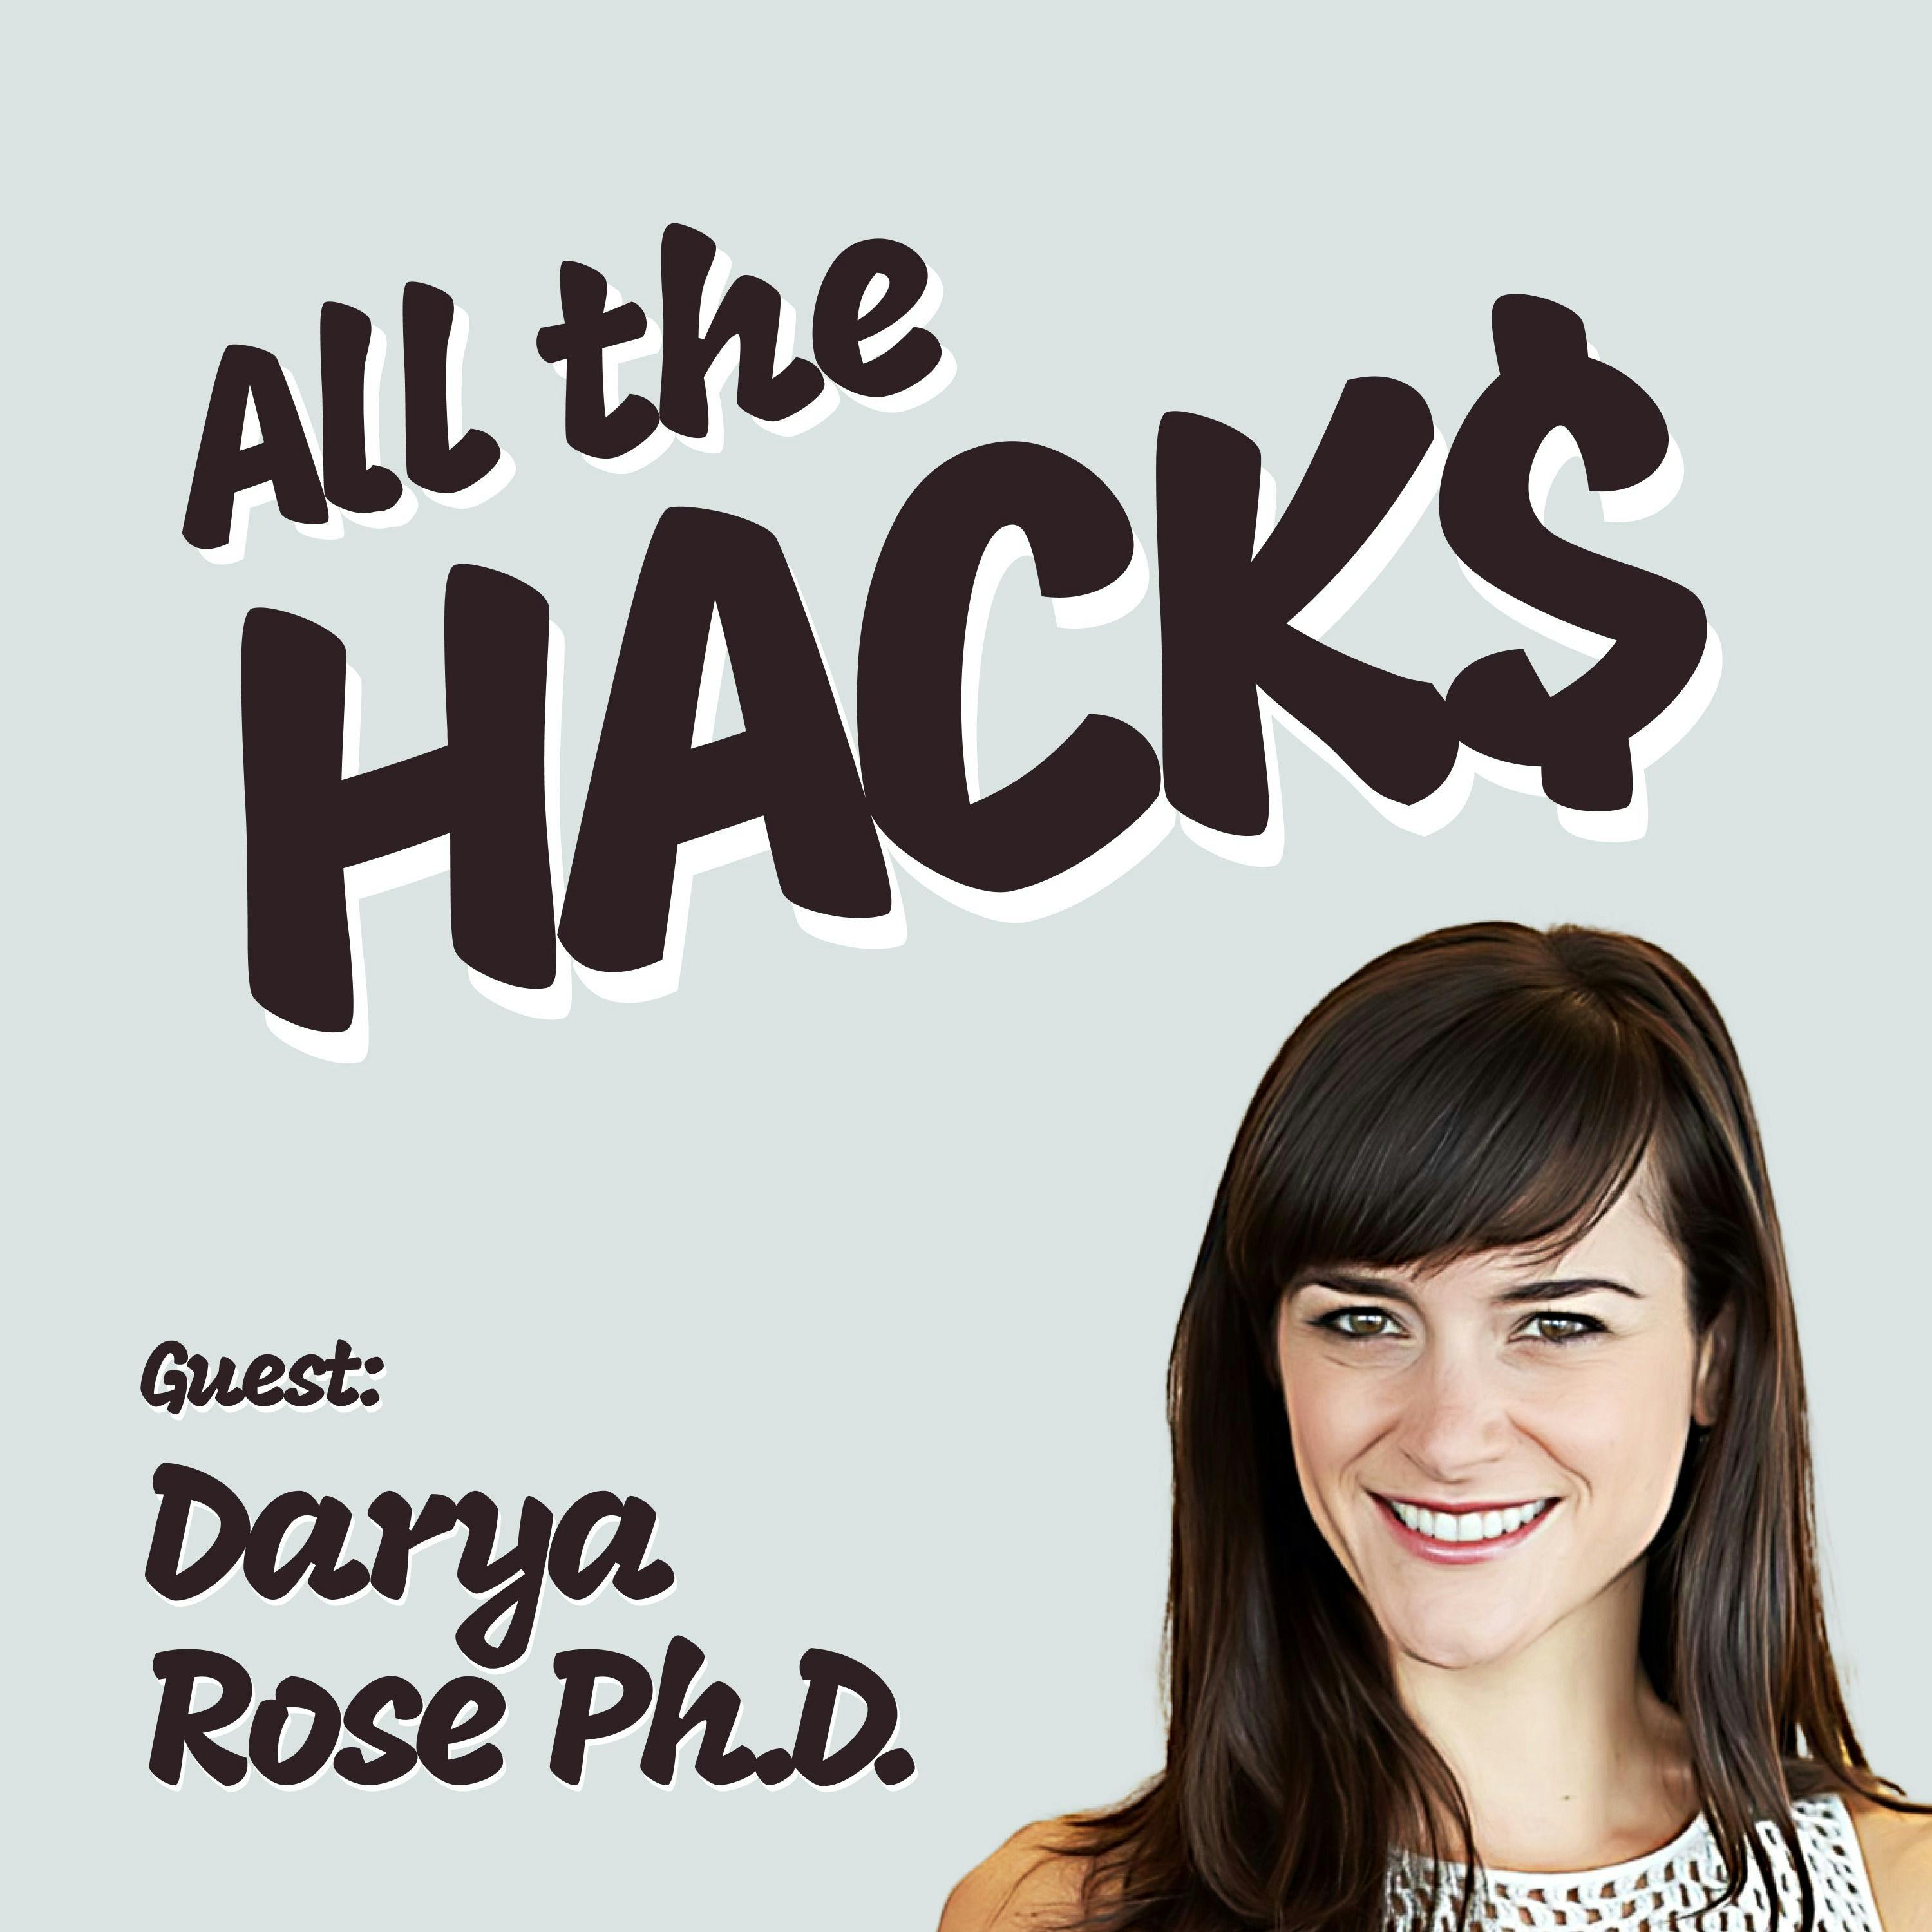 Real Food and The Science Behind Healthy Lifestyles with Darya Rose Ph.D.